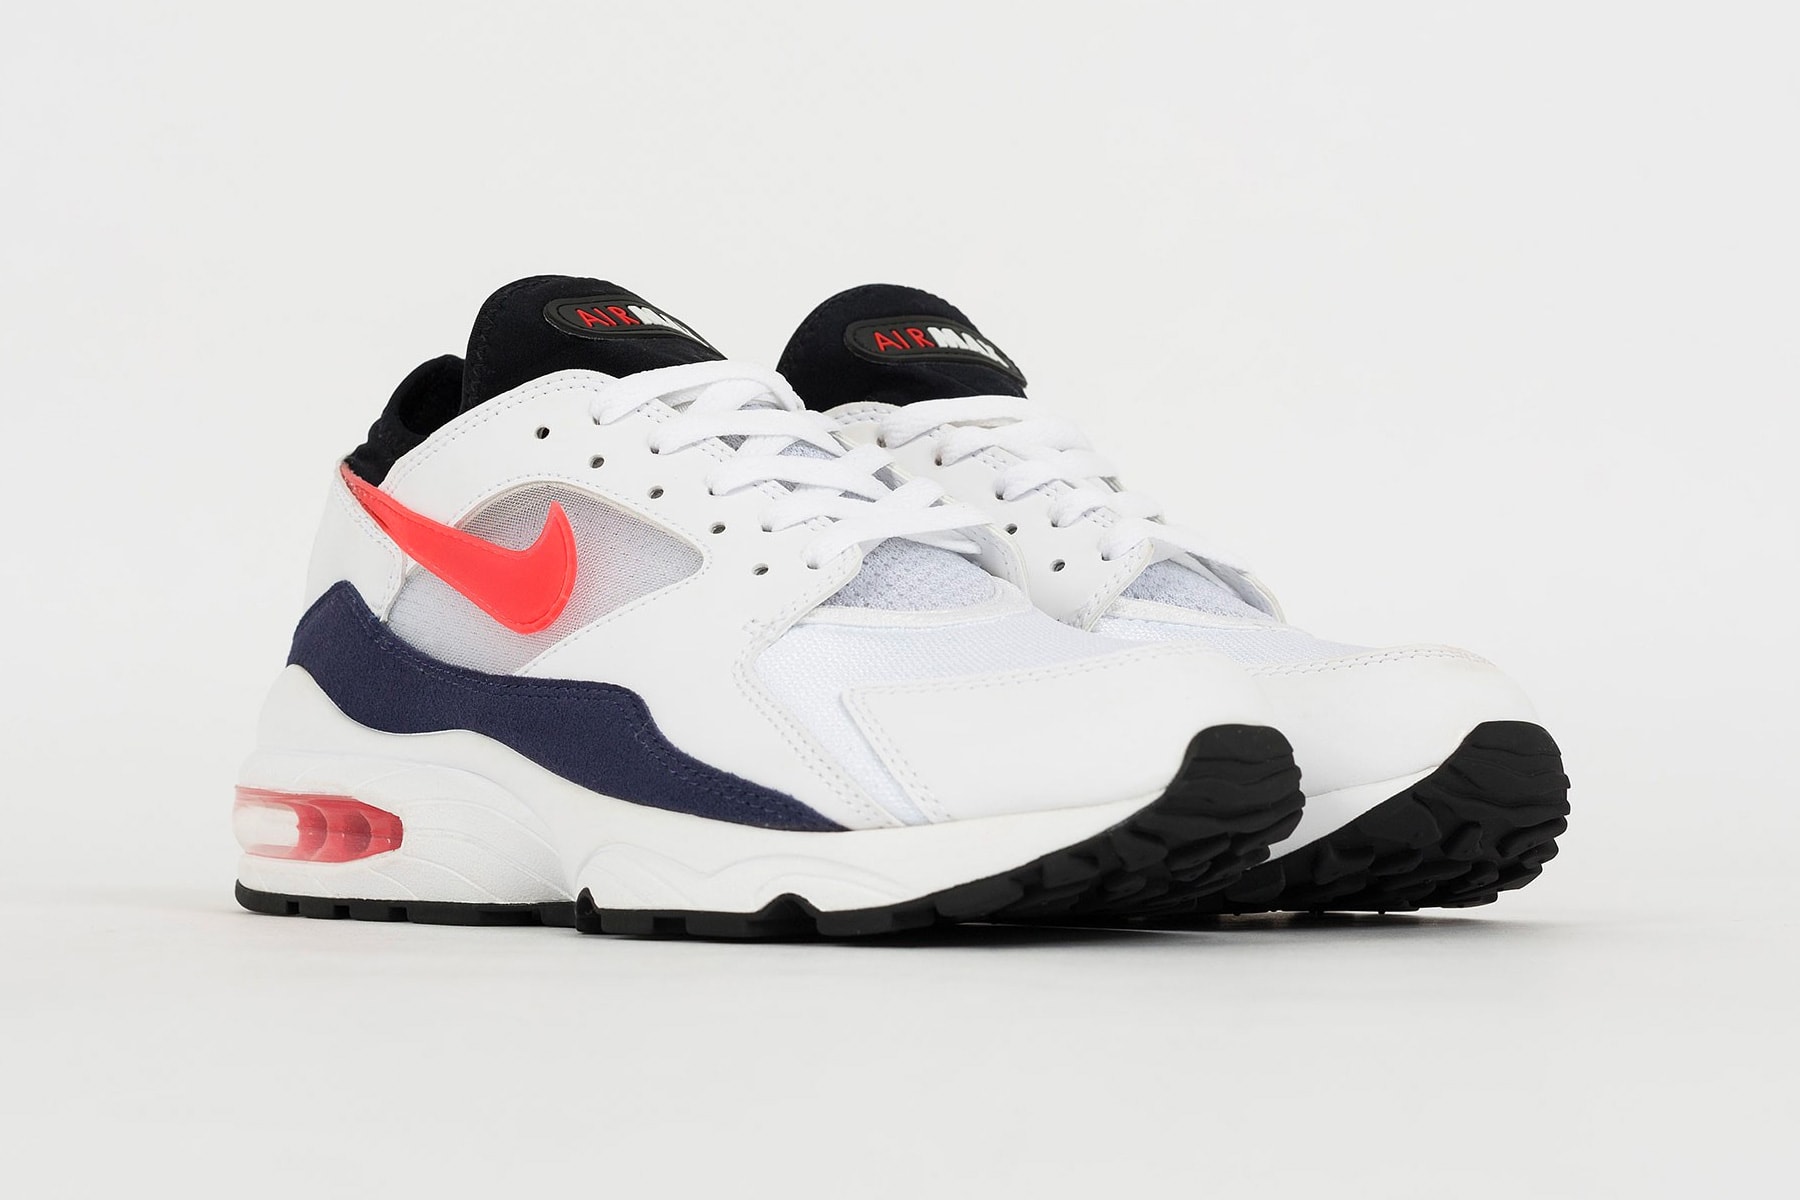 Nike Air Max 93 "Flame Red" Release Date purchase